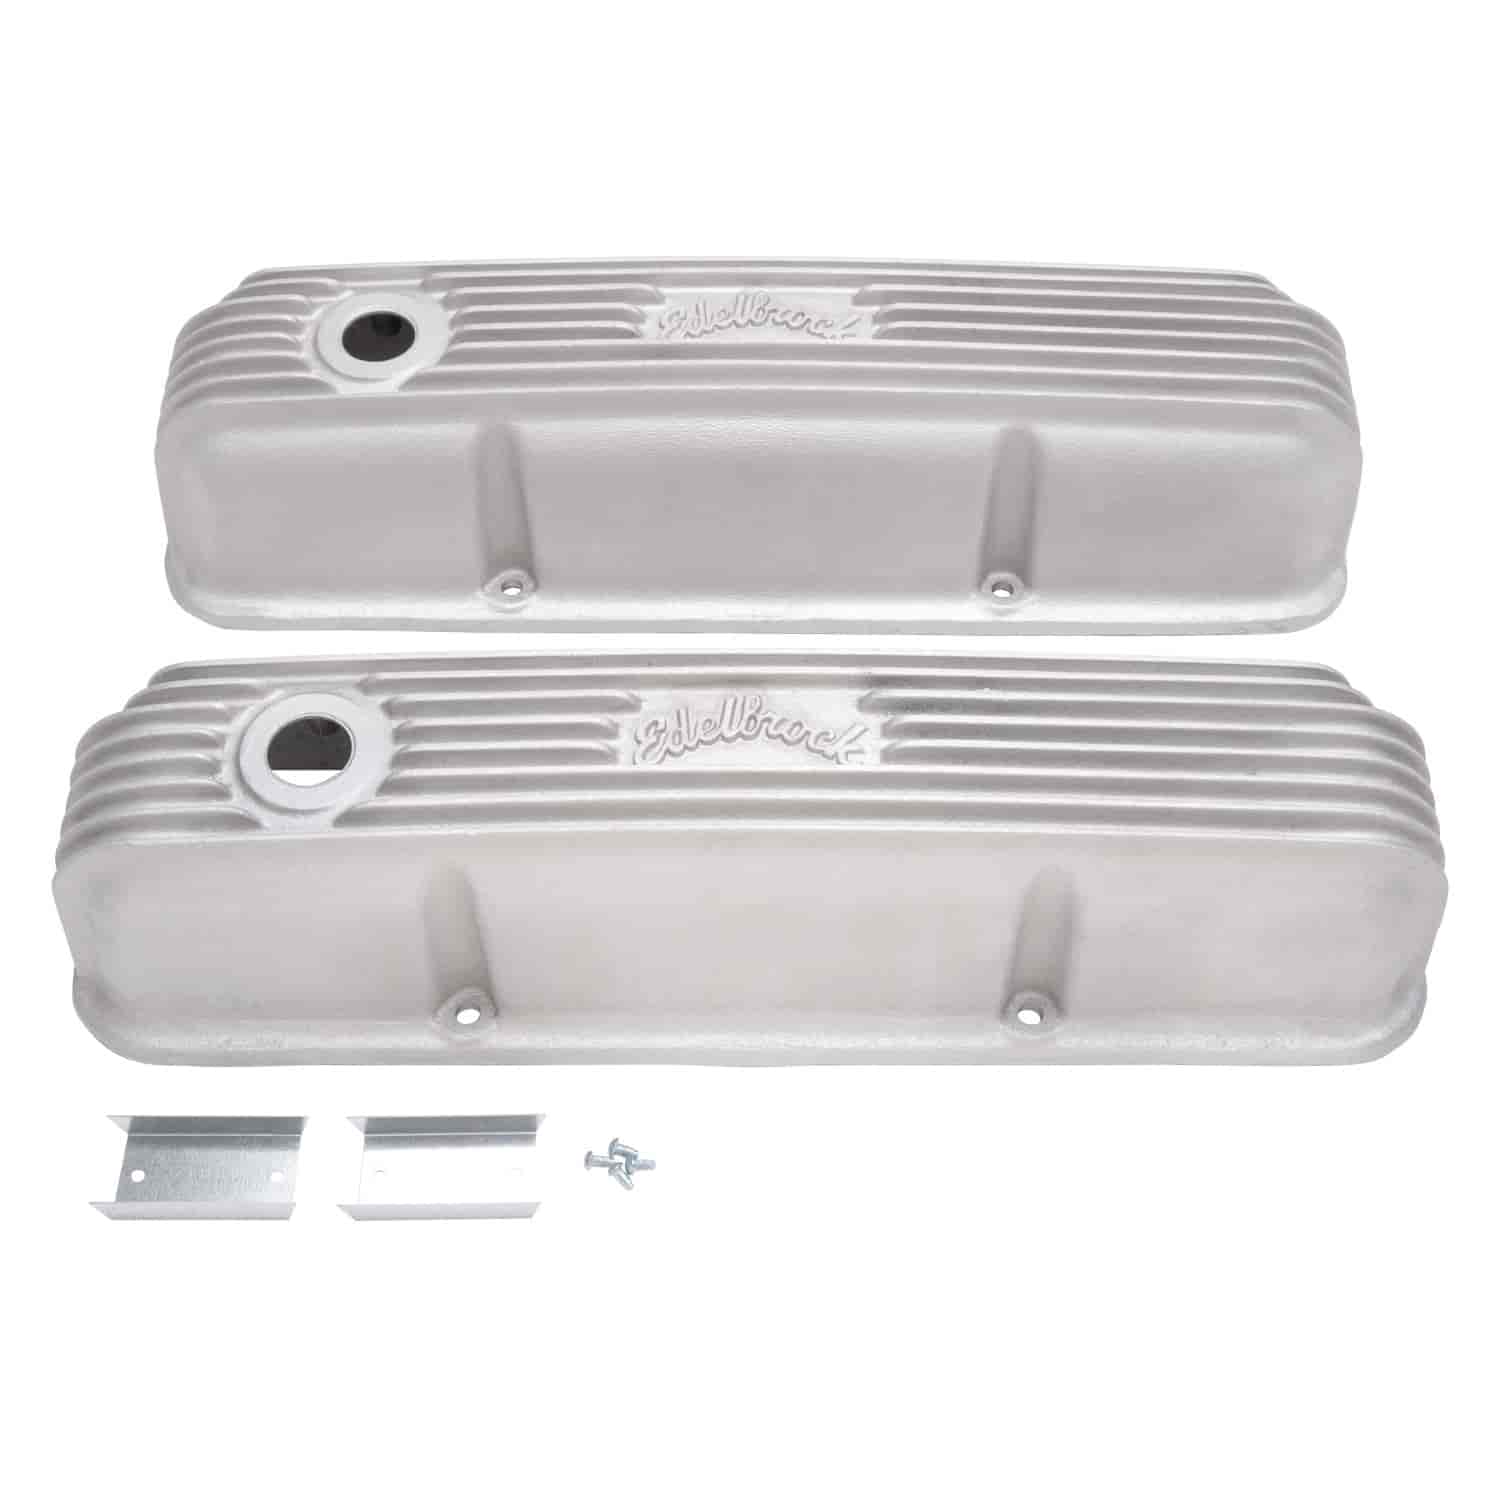 Classic Finned Valve Covers for 1958-1976 Ford FE with Satin Finish